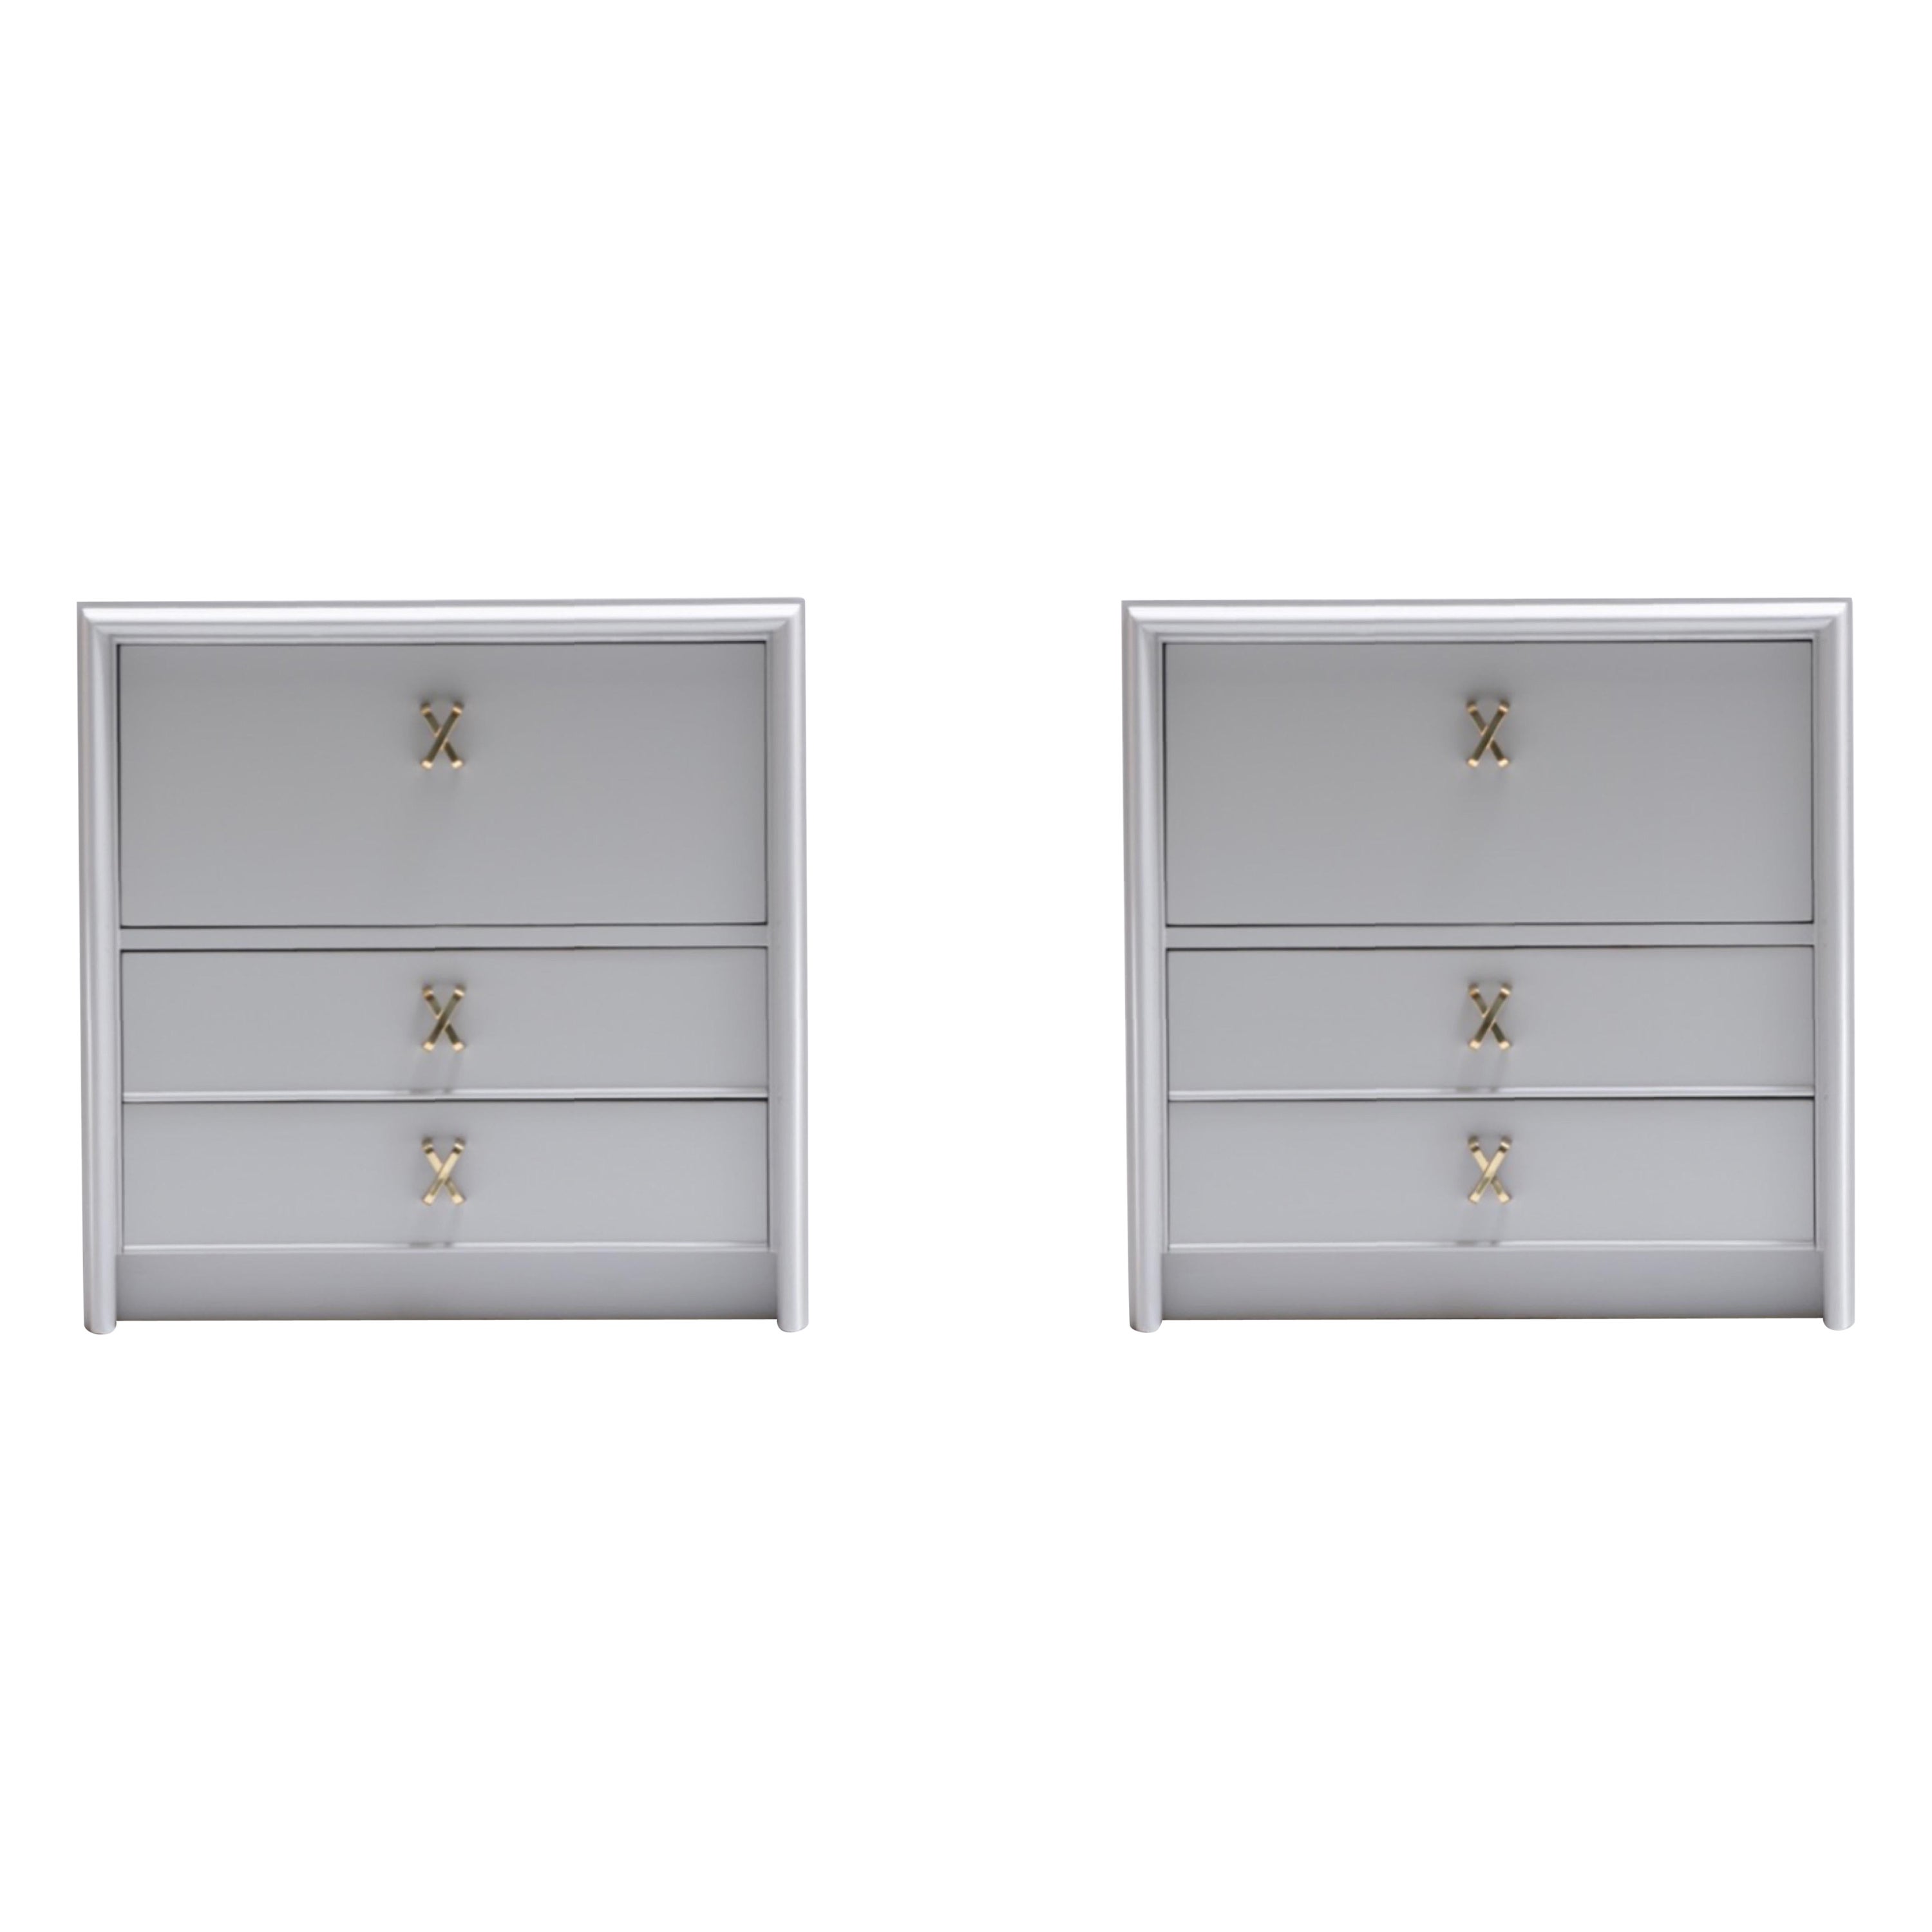 Pair of 1950s Paul Frankl Nightstands Lacquered in Farrow & Ball Pavilion Grey 